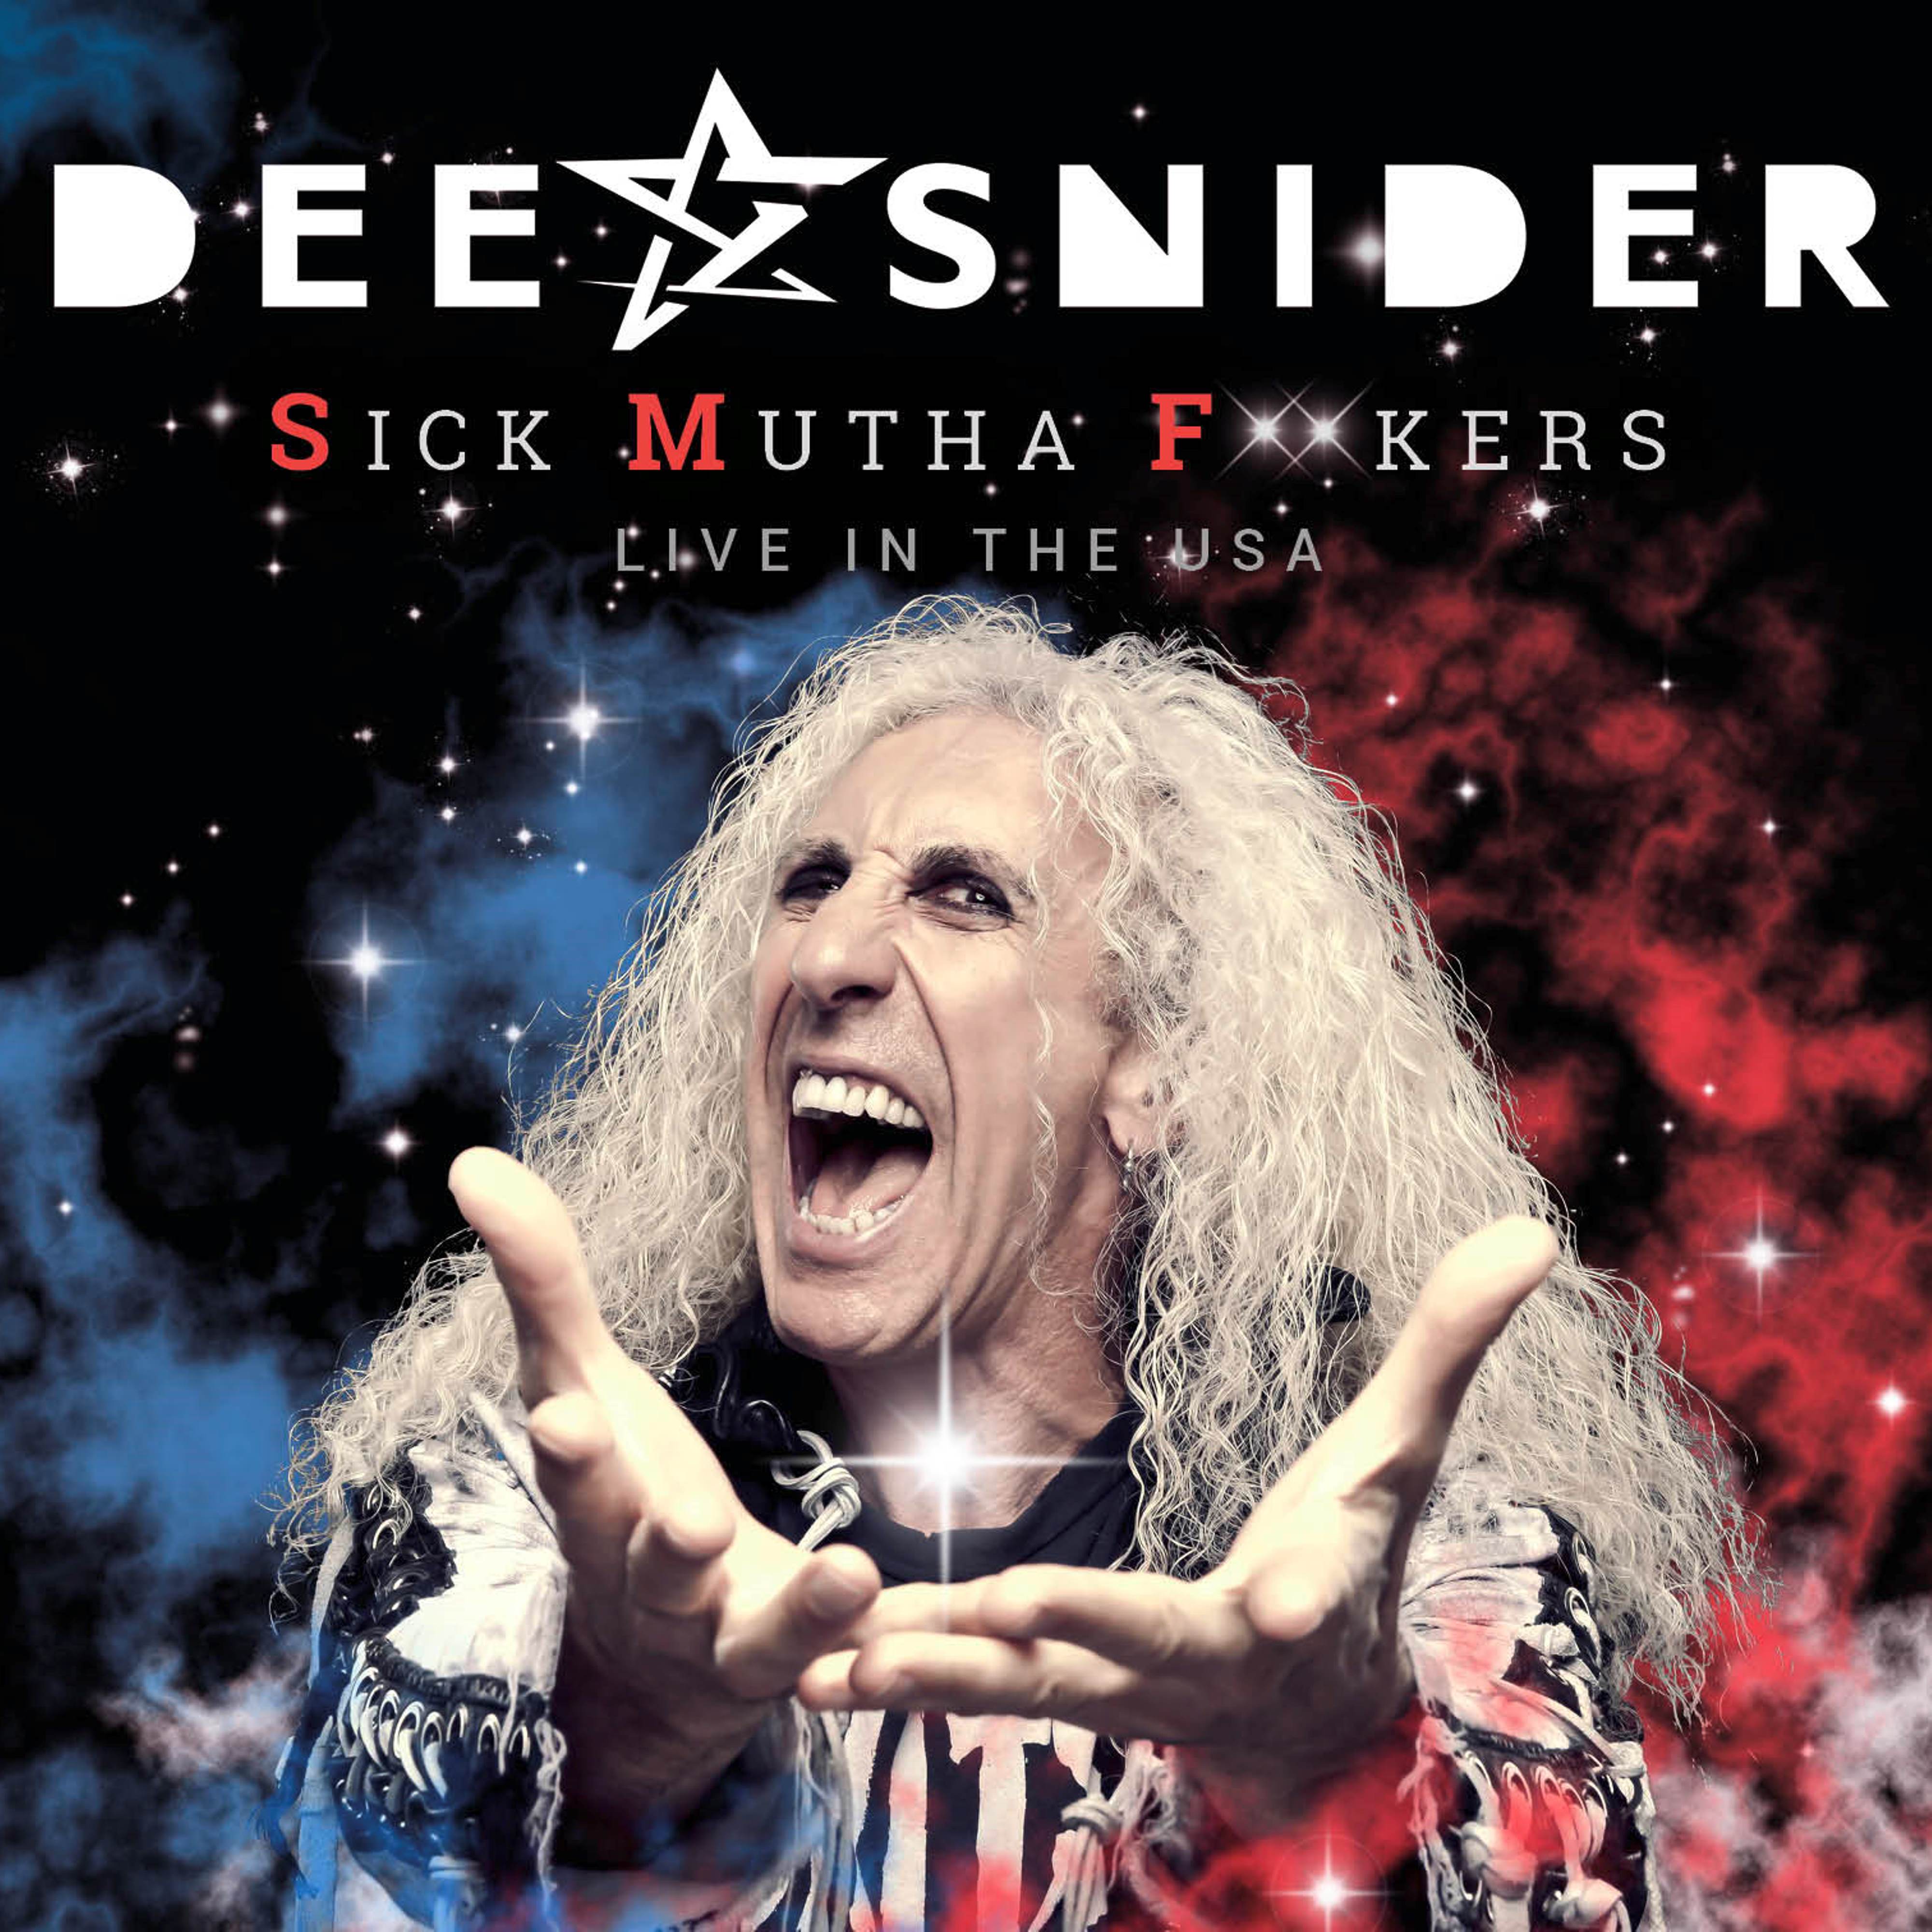 Dee Snider - S.M.F. - Live In The USA - CD